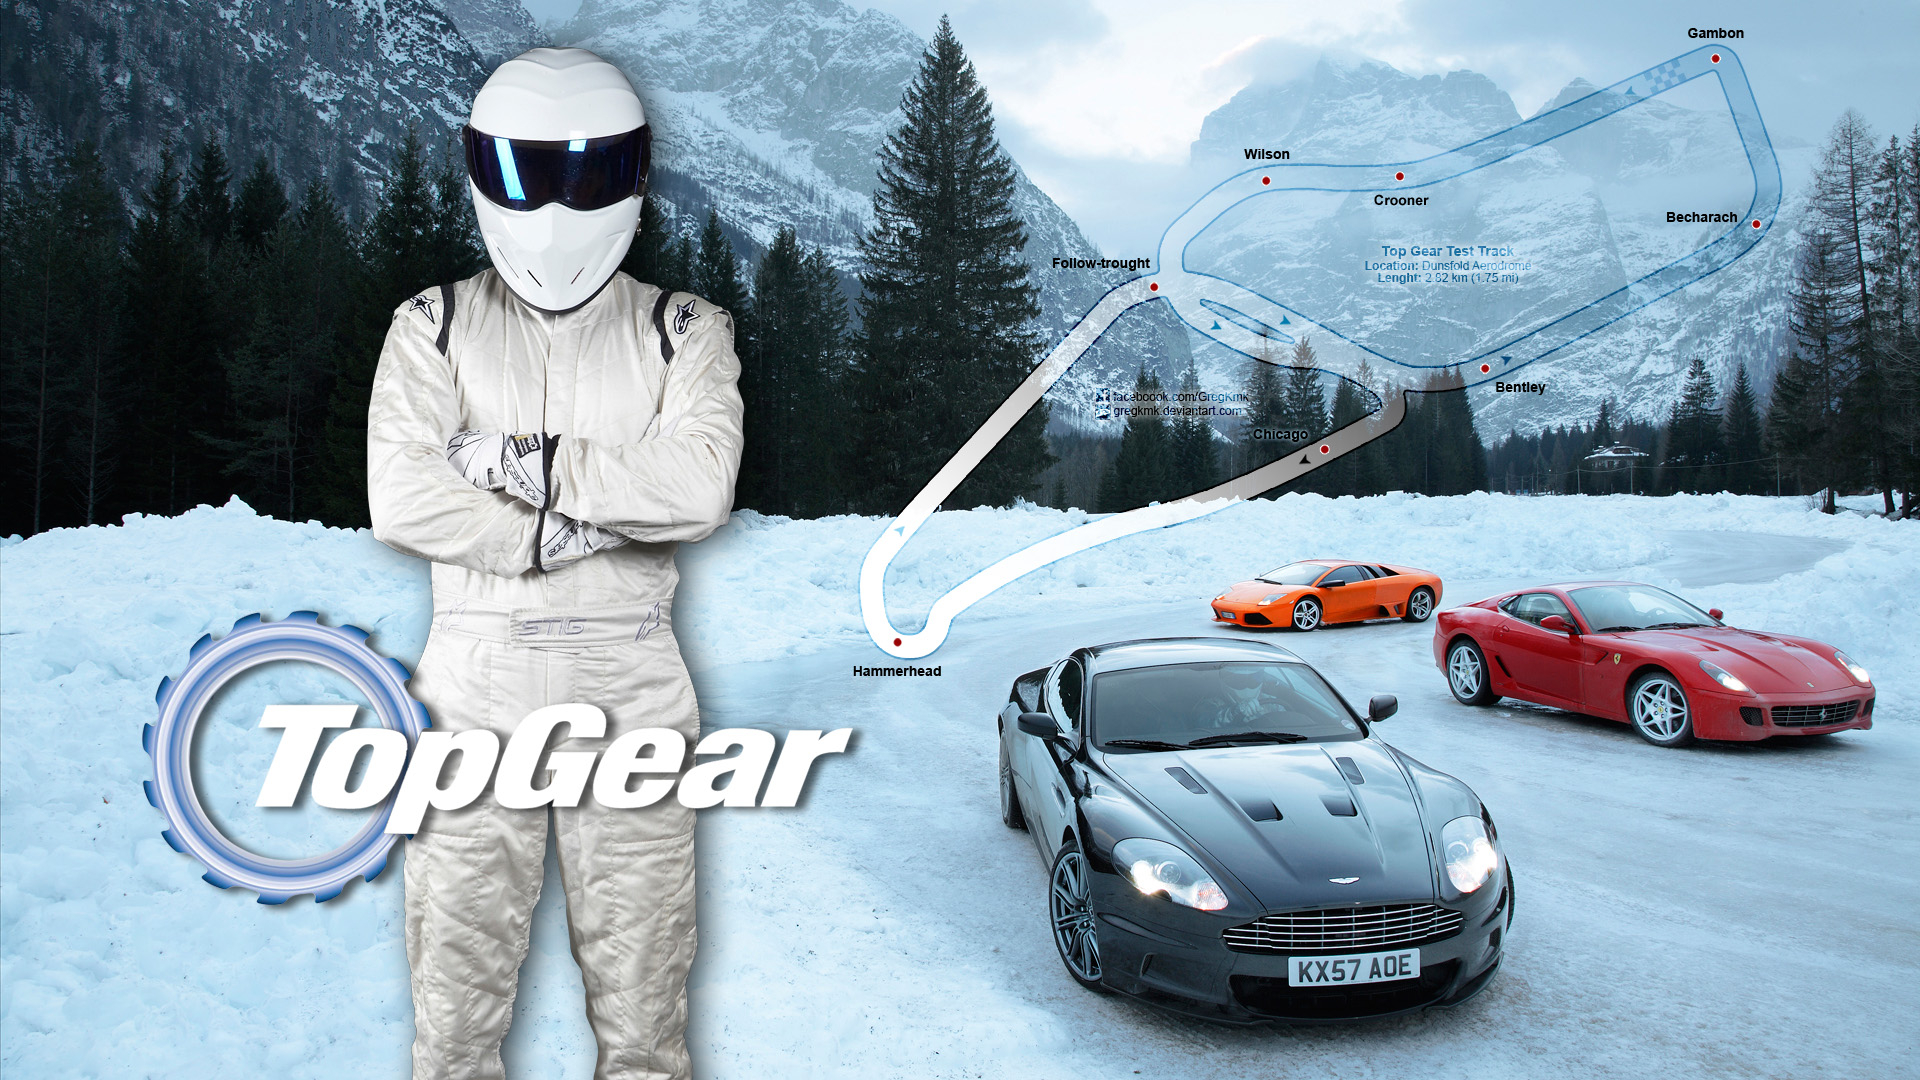 1920x1080 140+ Top Gear HD Wallpapers and Backgrounds